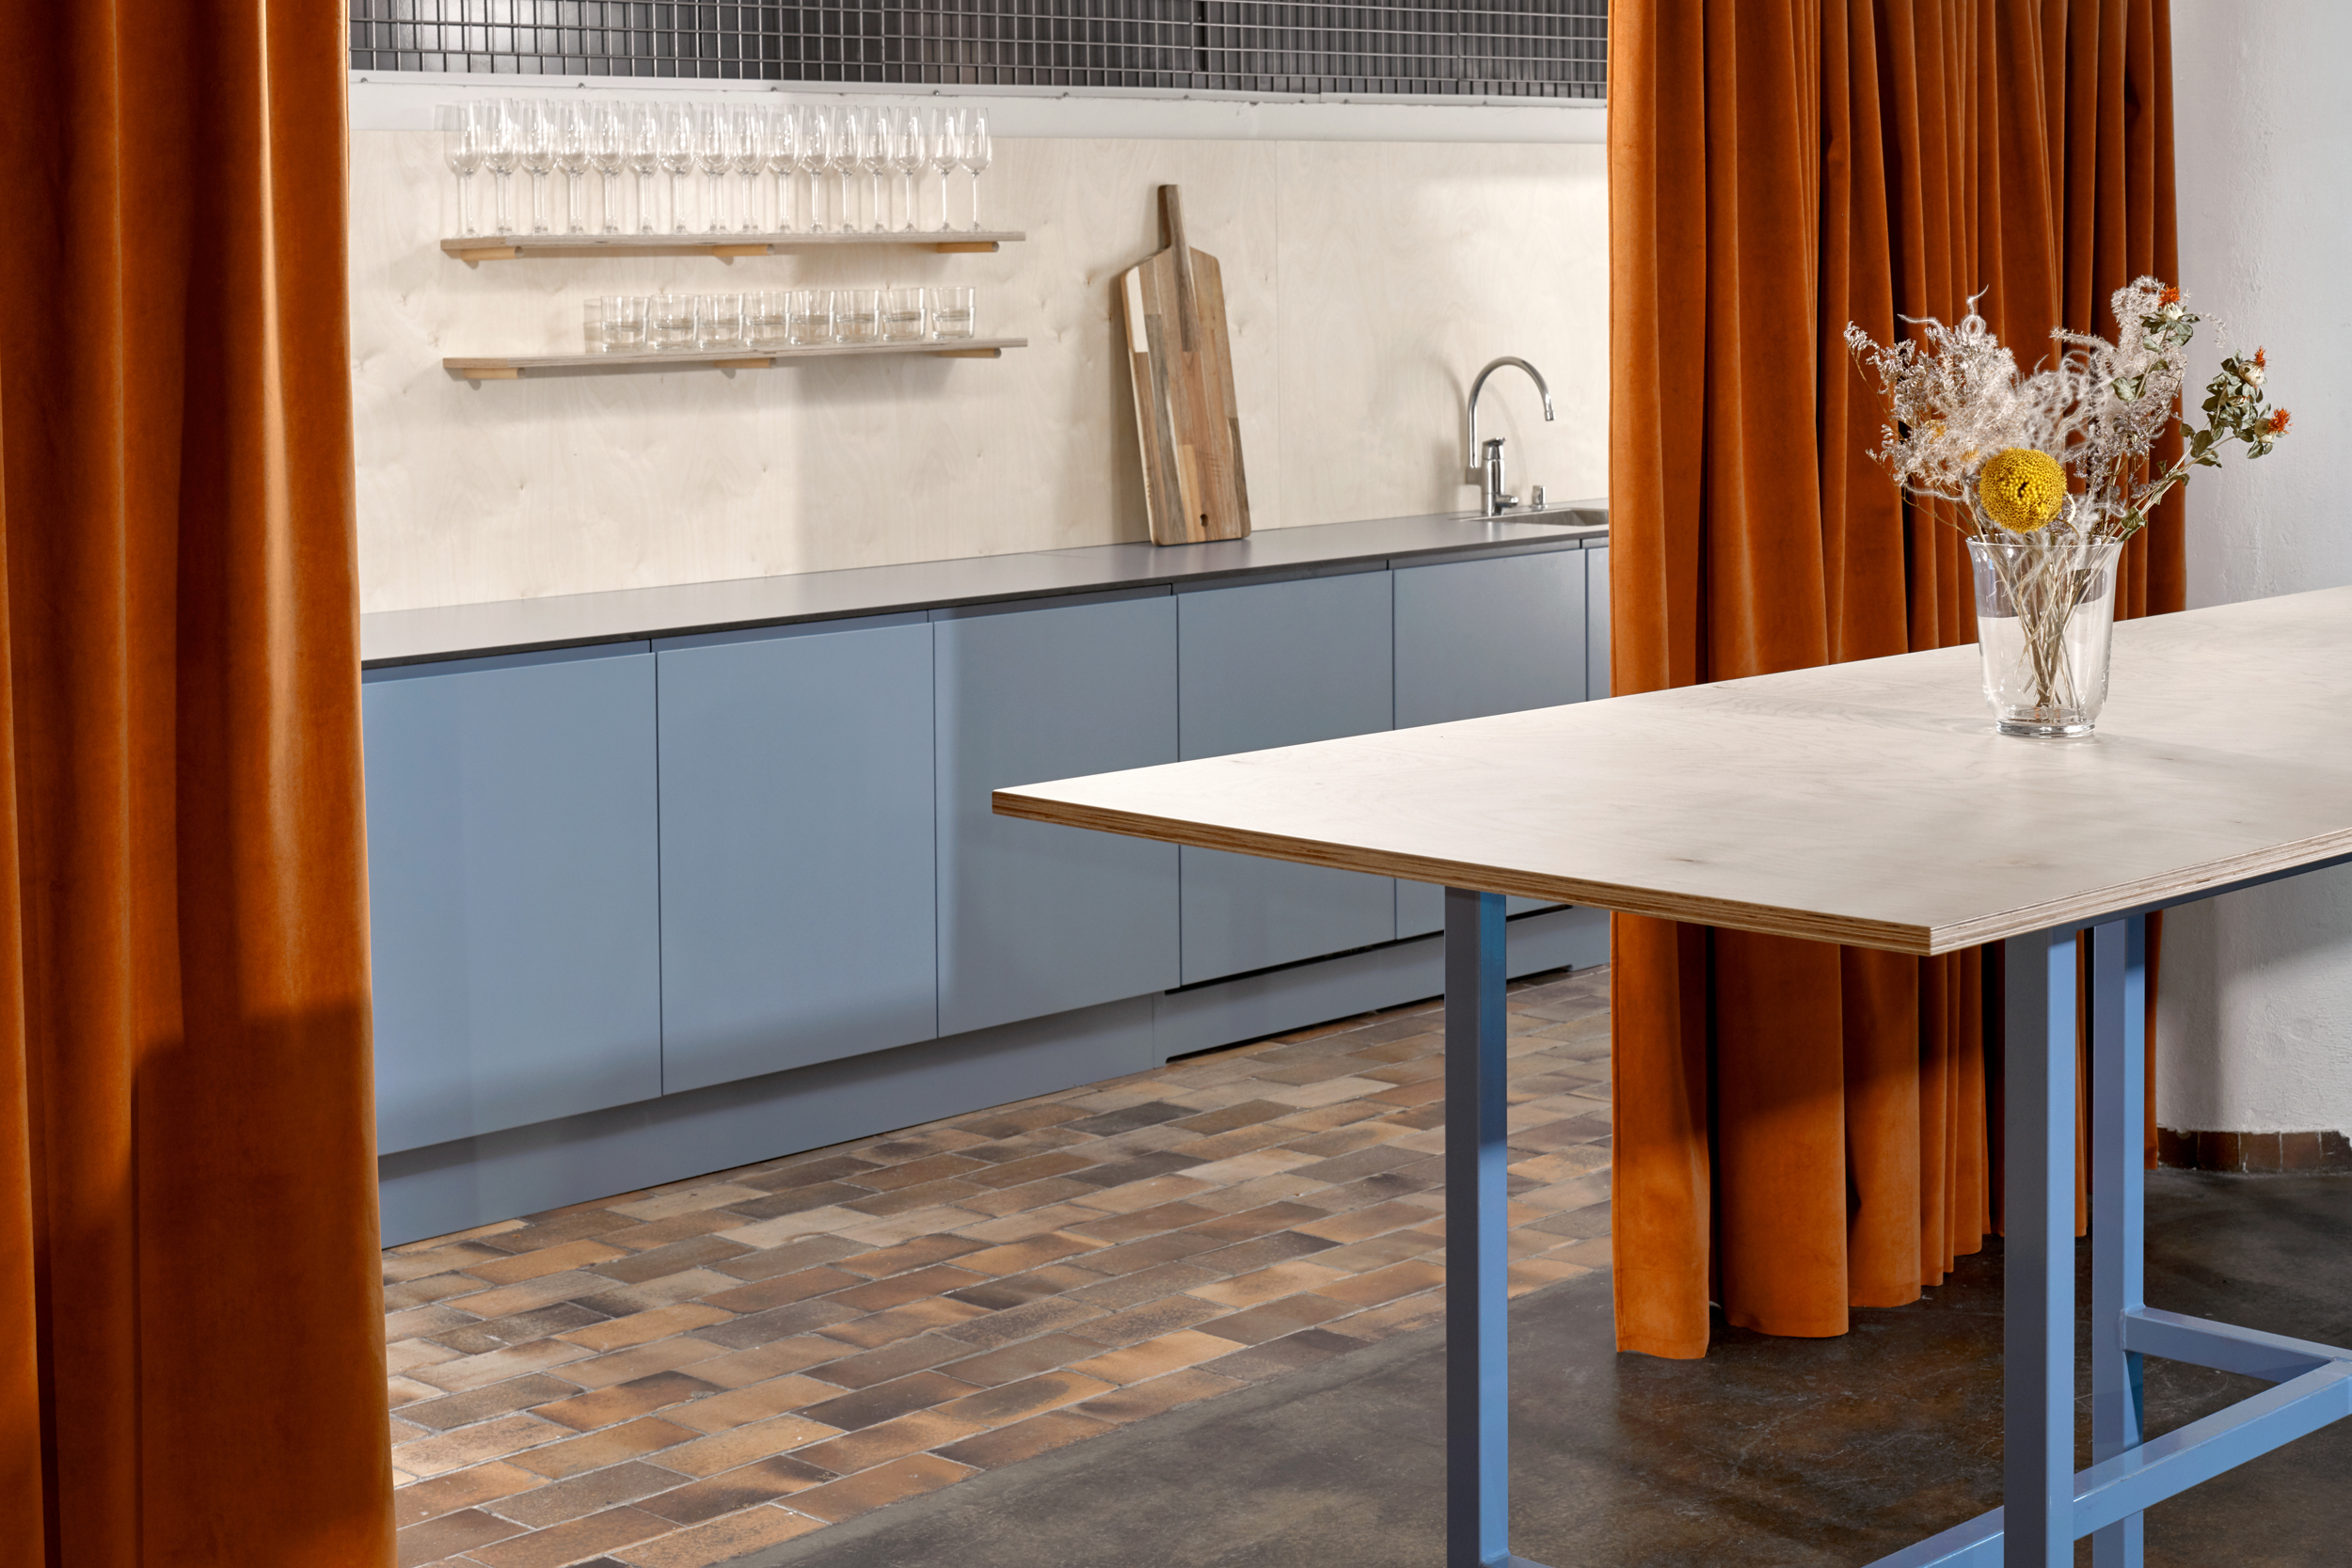 a baby blue kitchen cabinets behind orange curtains, stylish modern look of an interior